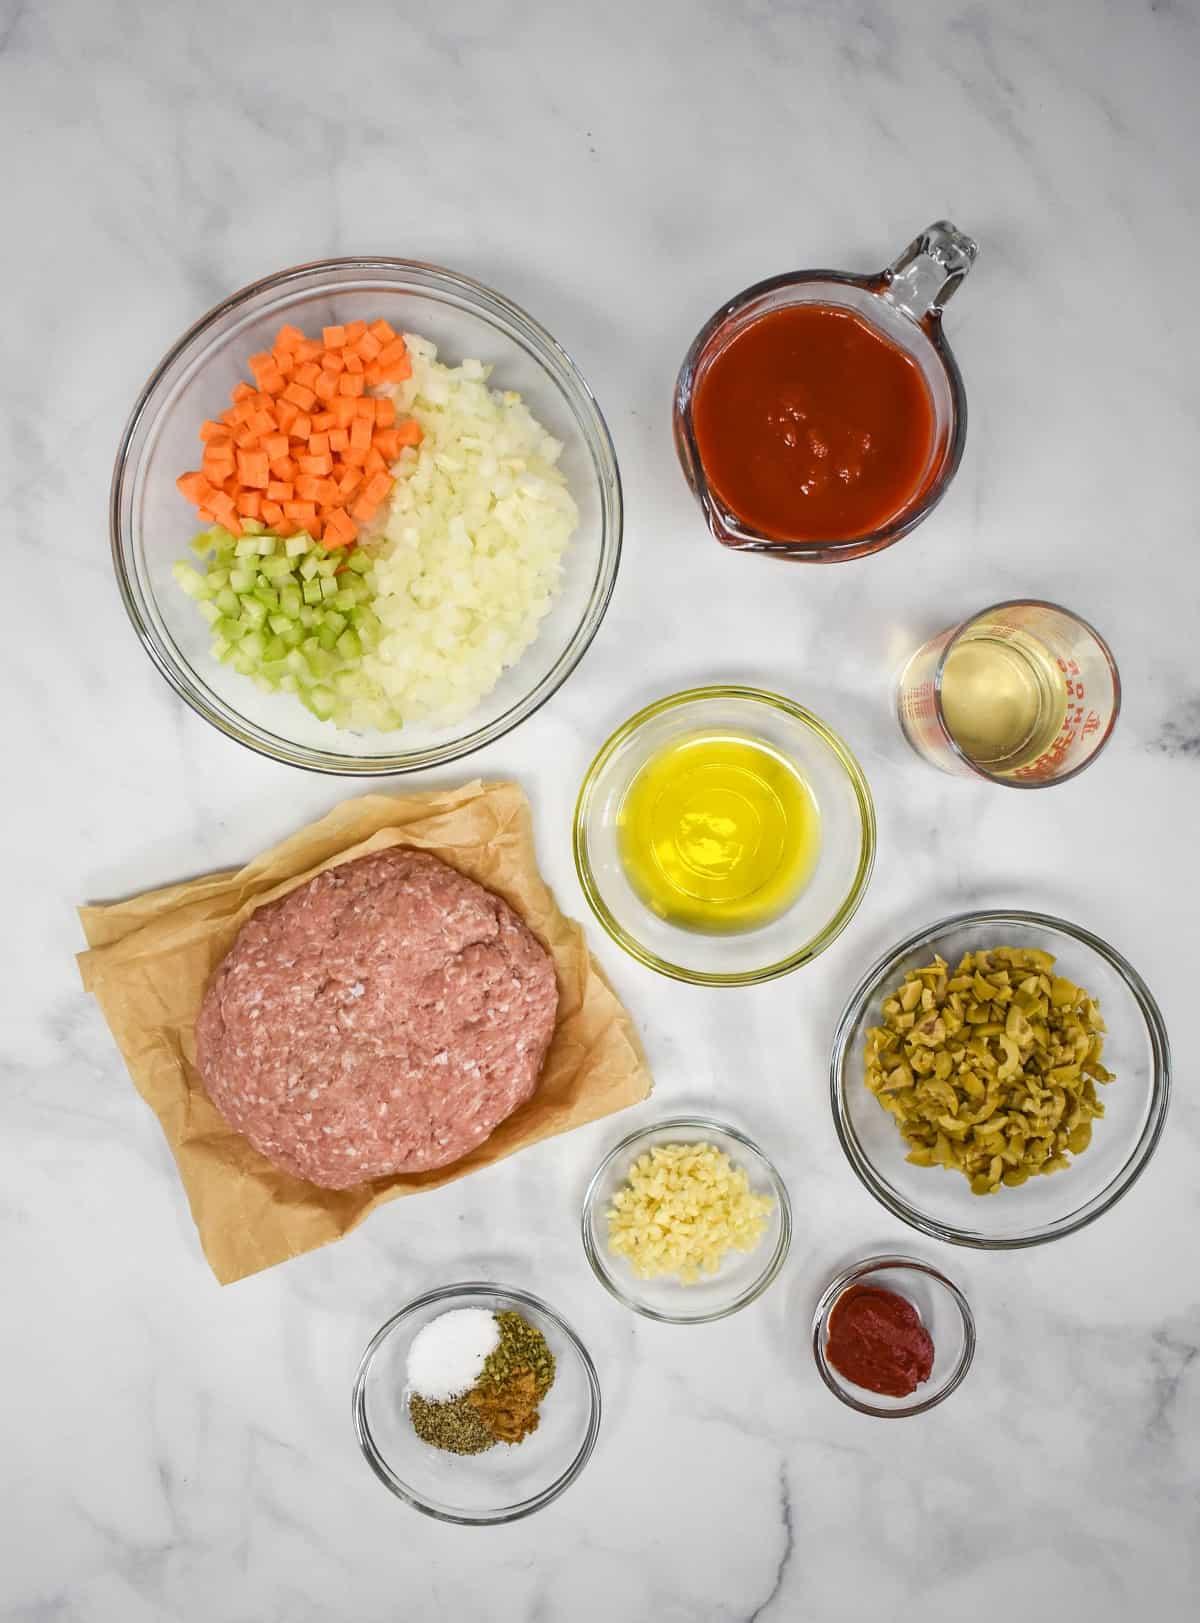 The prepped ingredients for the turkey picadillo filling arranged in glass bowls and arranged on a white table.